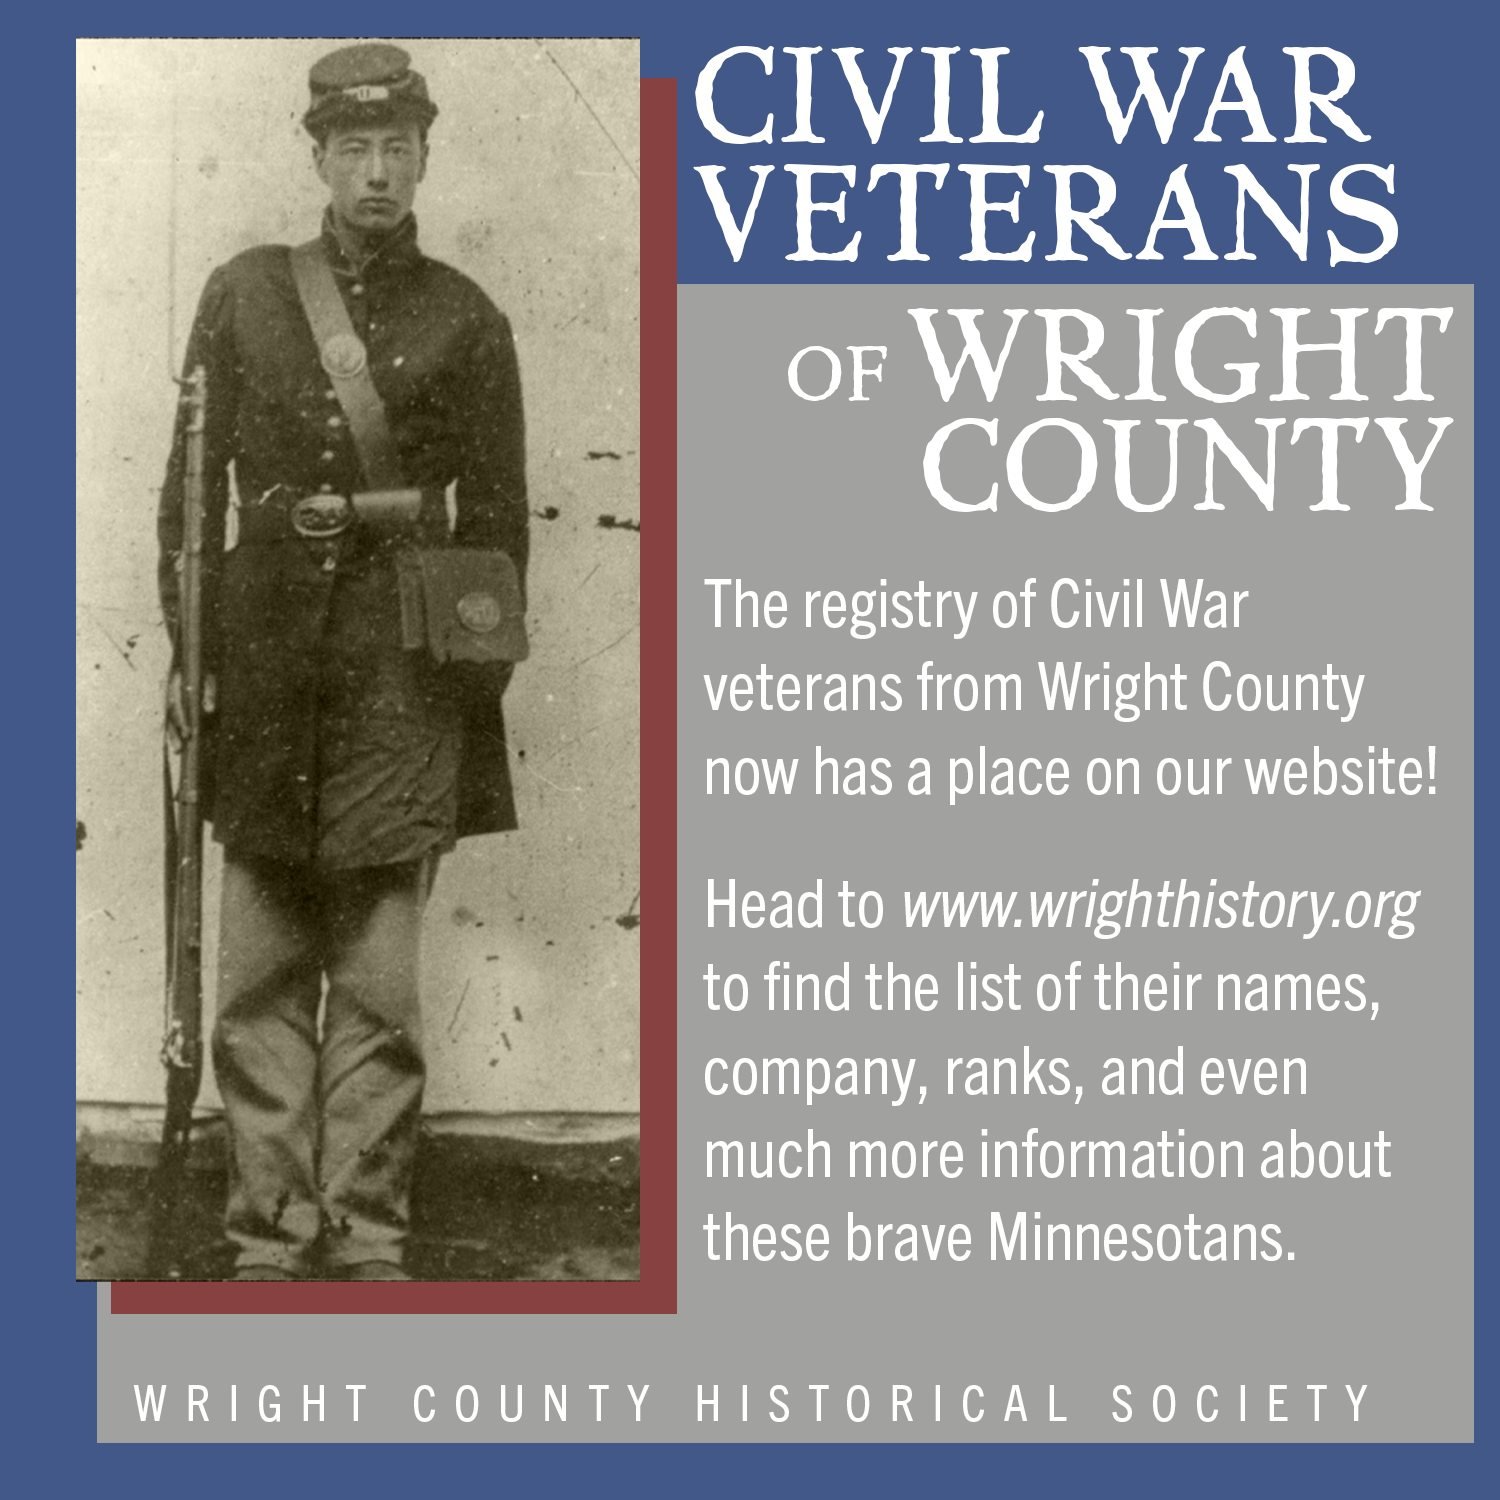 Way back in November we hosted a presentation about a collection of all the Civil War Veterans of Wright County into one comprehensive list. This was done by our very own Research &amp; Reference Librarian, Mary Bischoff.

Now you can go to our websi